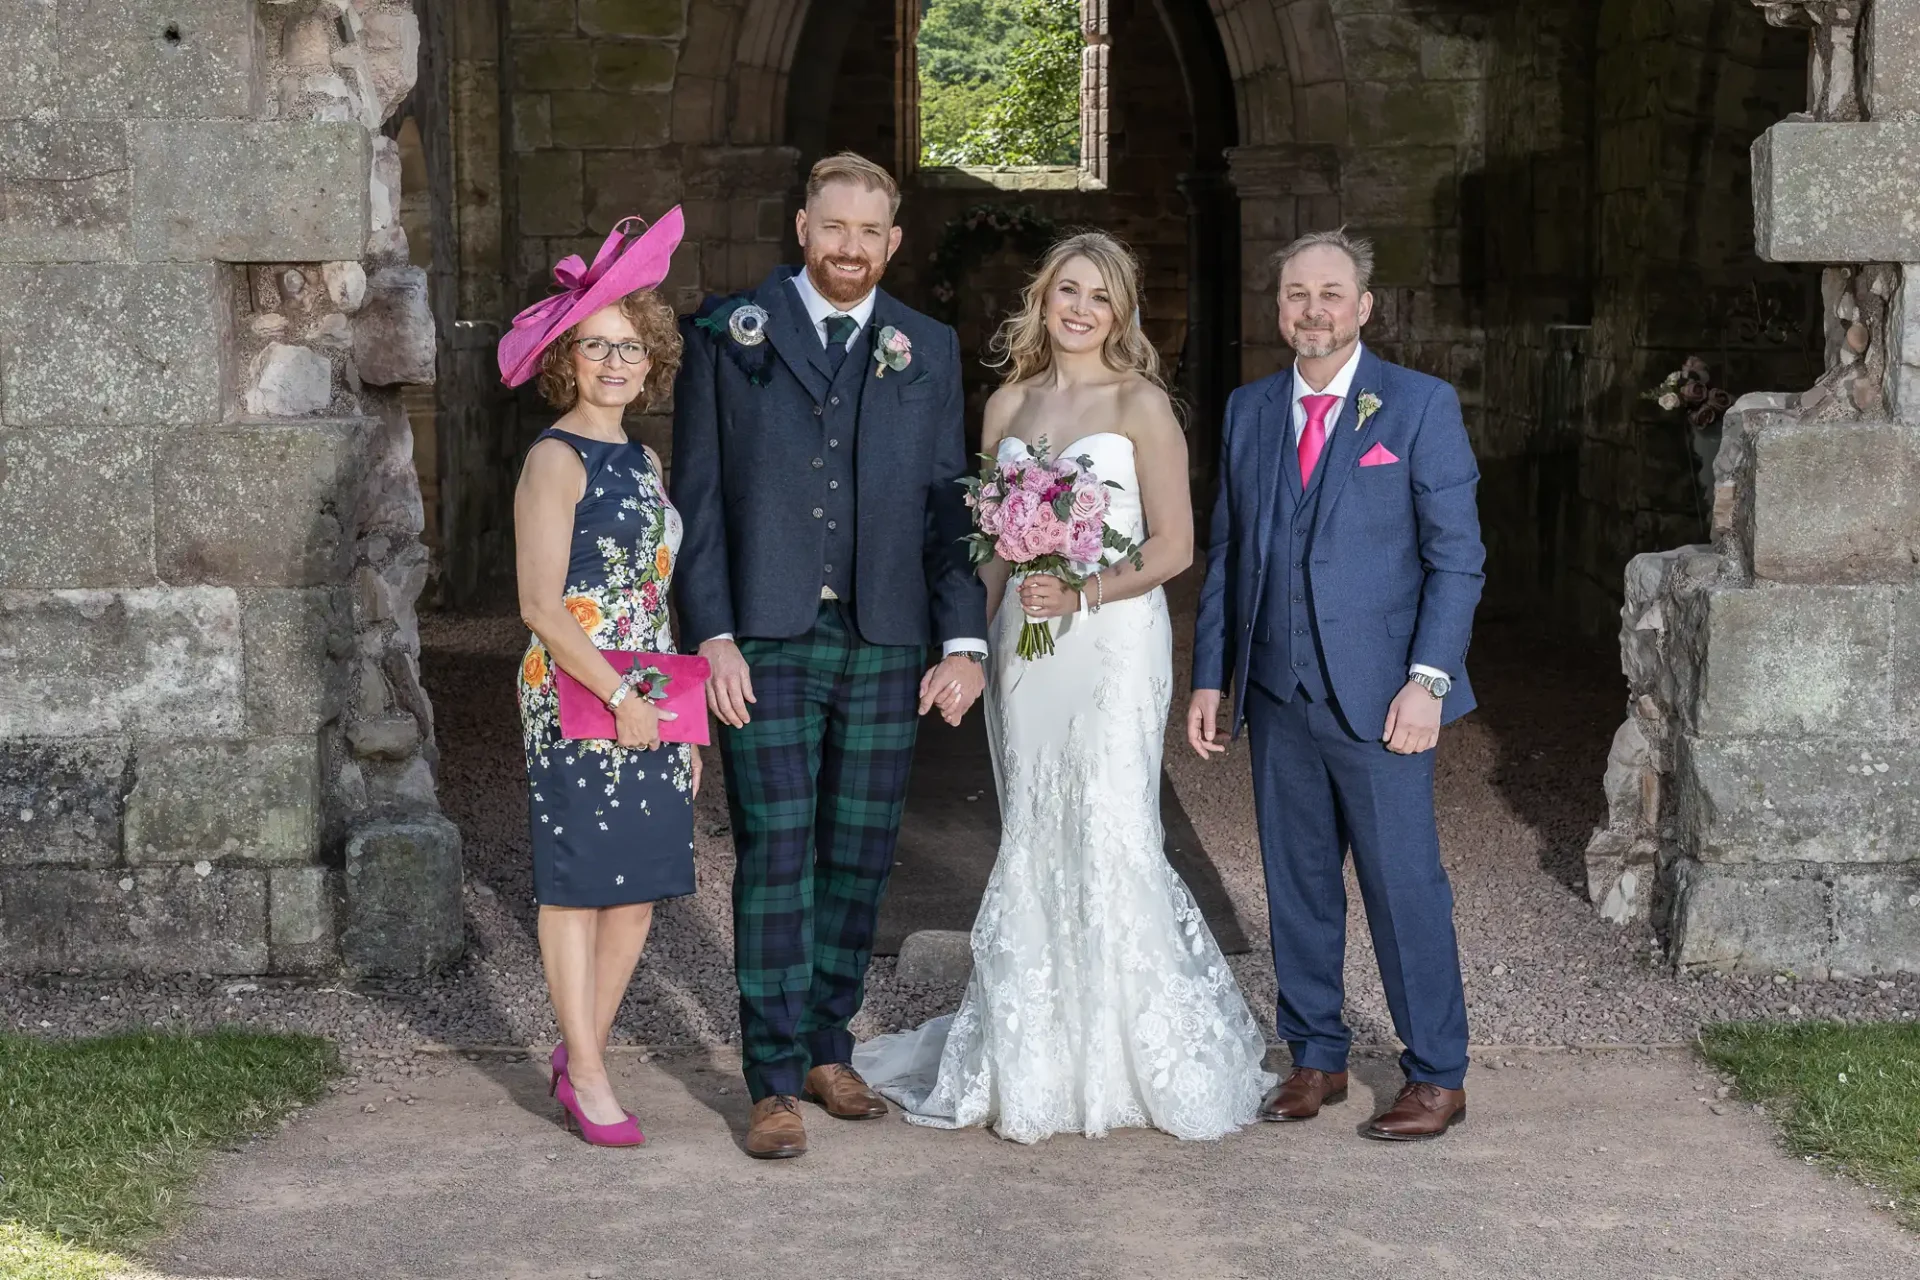 A wedding photo of a smiling bride and groom with two guests, men in suits and a woman in a pink hat, standing in a historic stone archway.